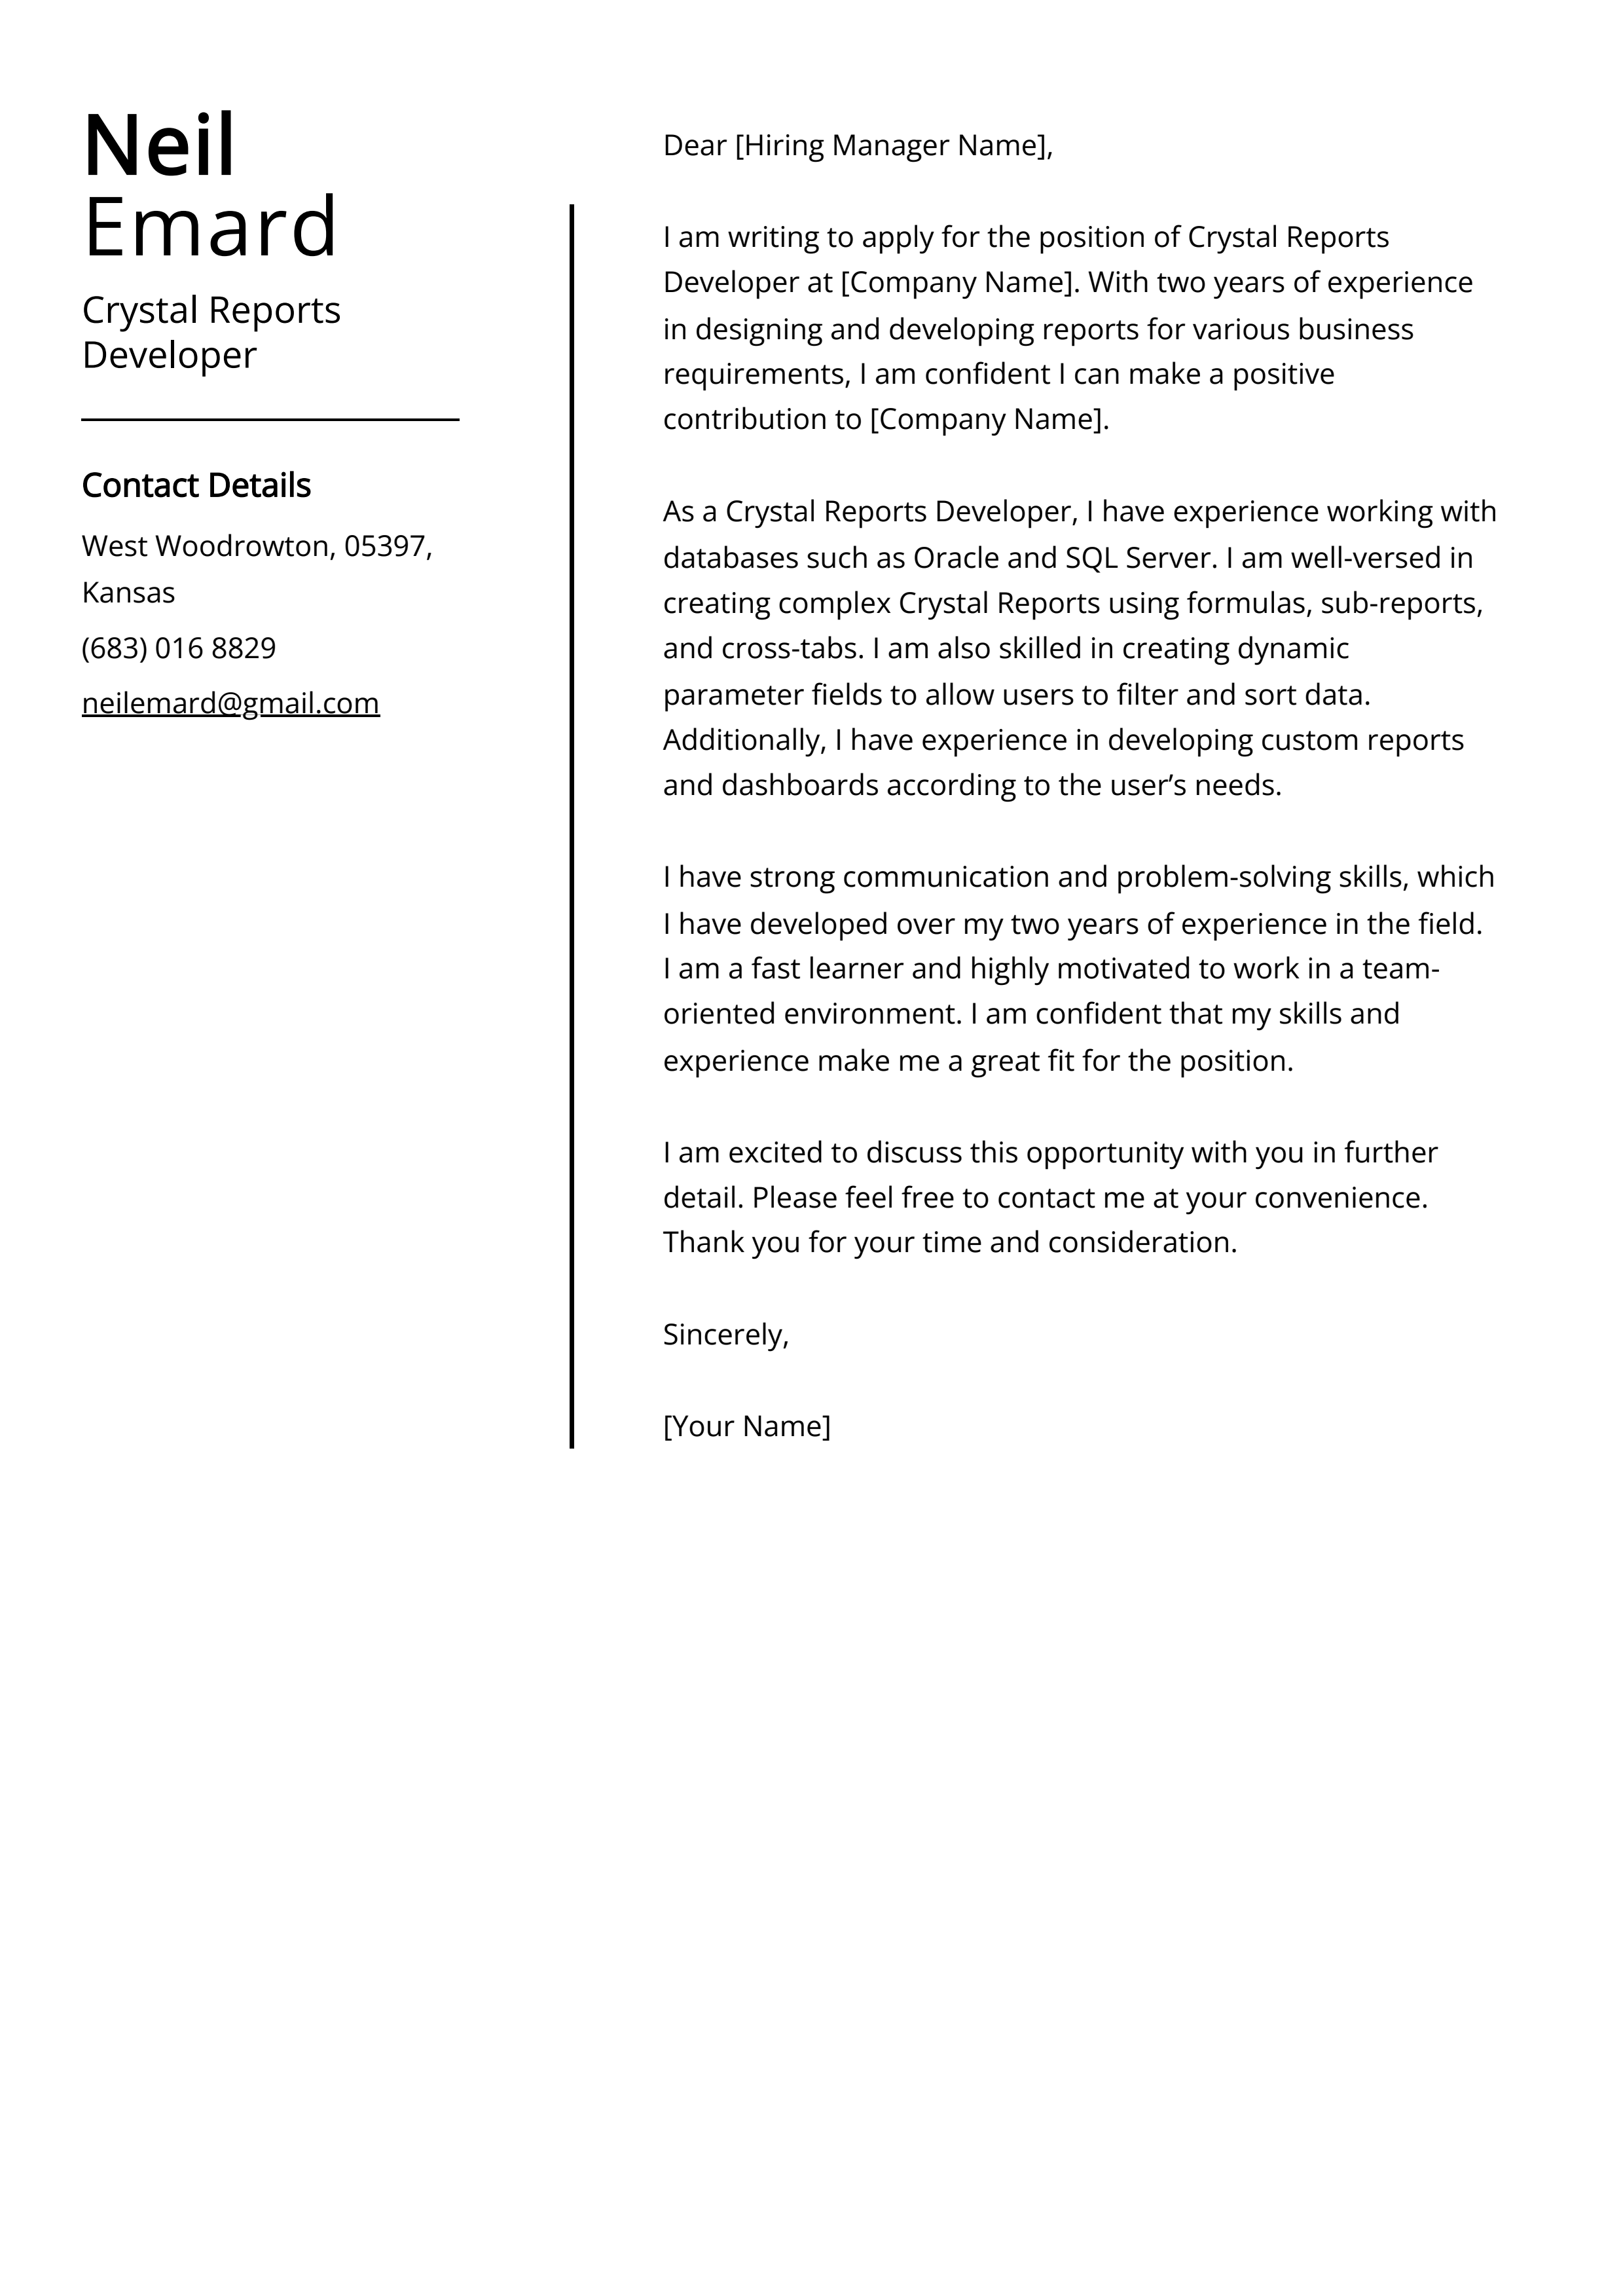 Crystal Reports Developer Cover Letter Example